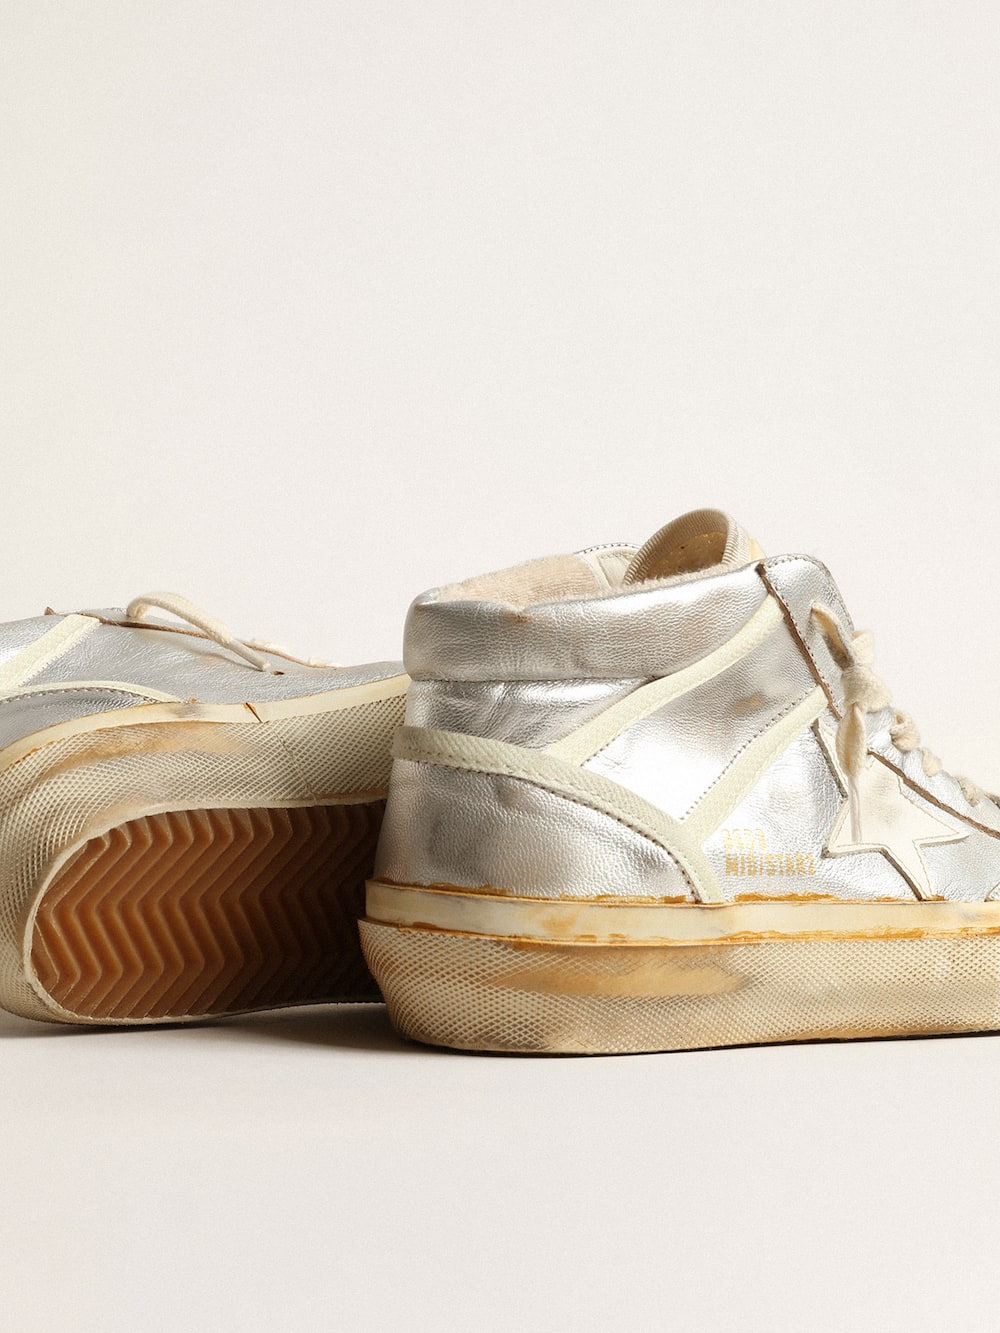 Golden Goose - Men’s Mid Star in silver metallic leather with ivory star in 